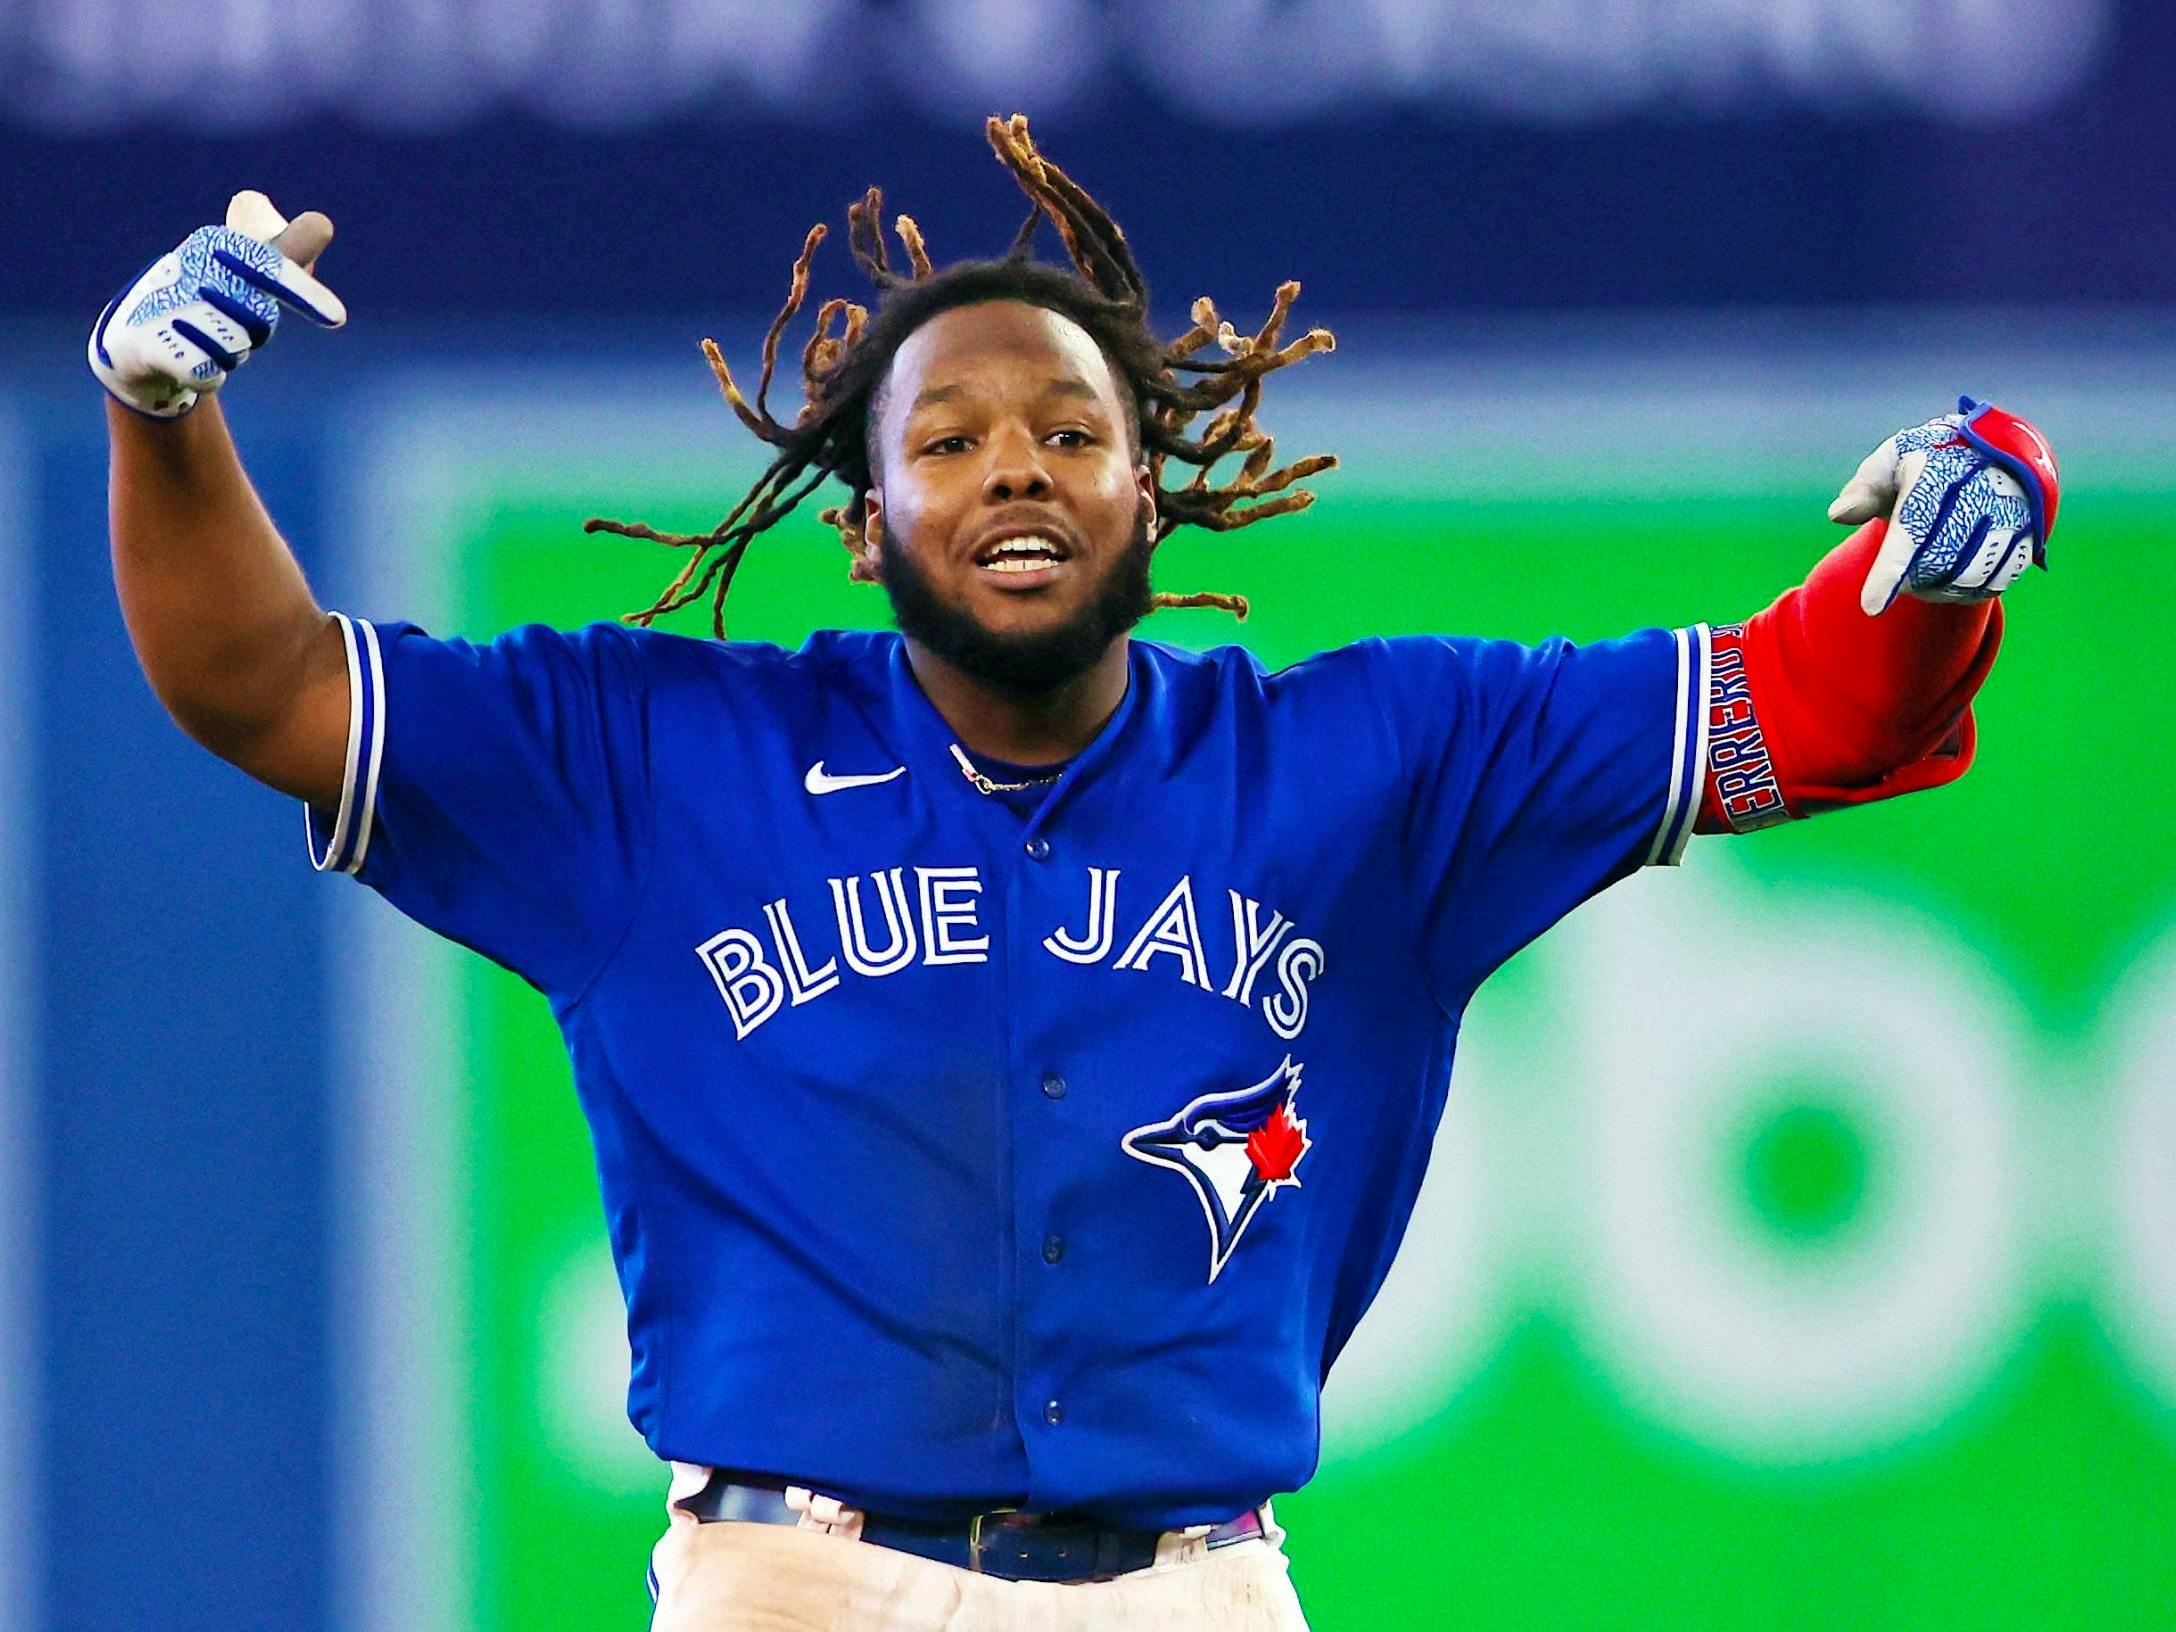 Vlad Jr. dropping weight: 'I got to work at once' after season ended